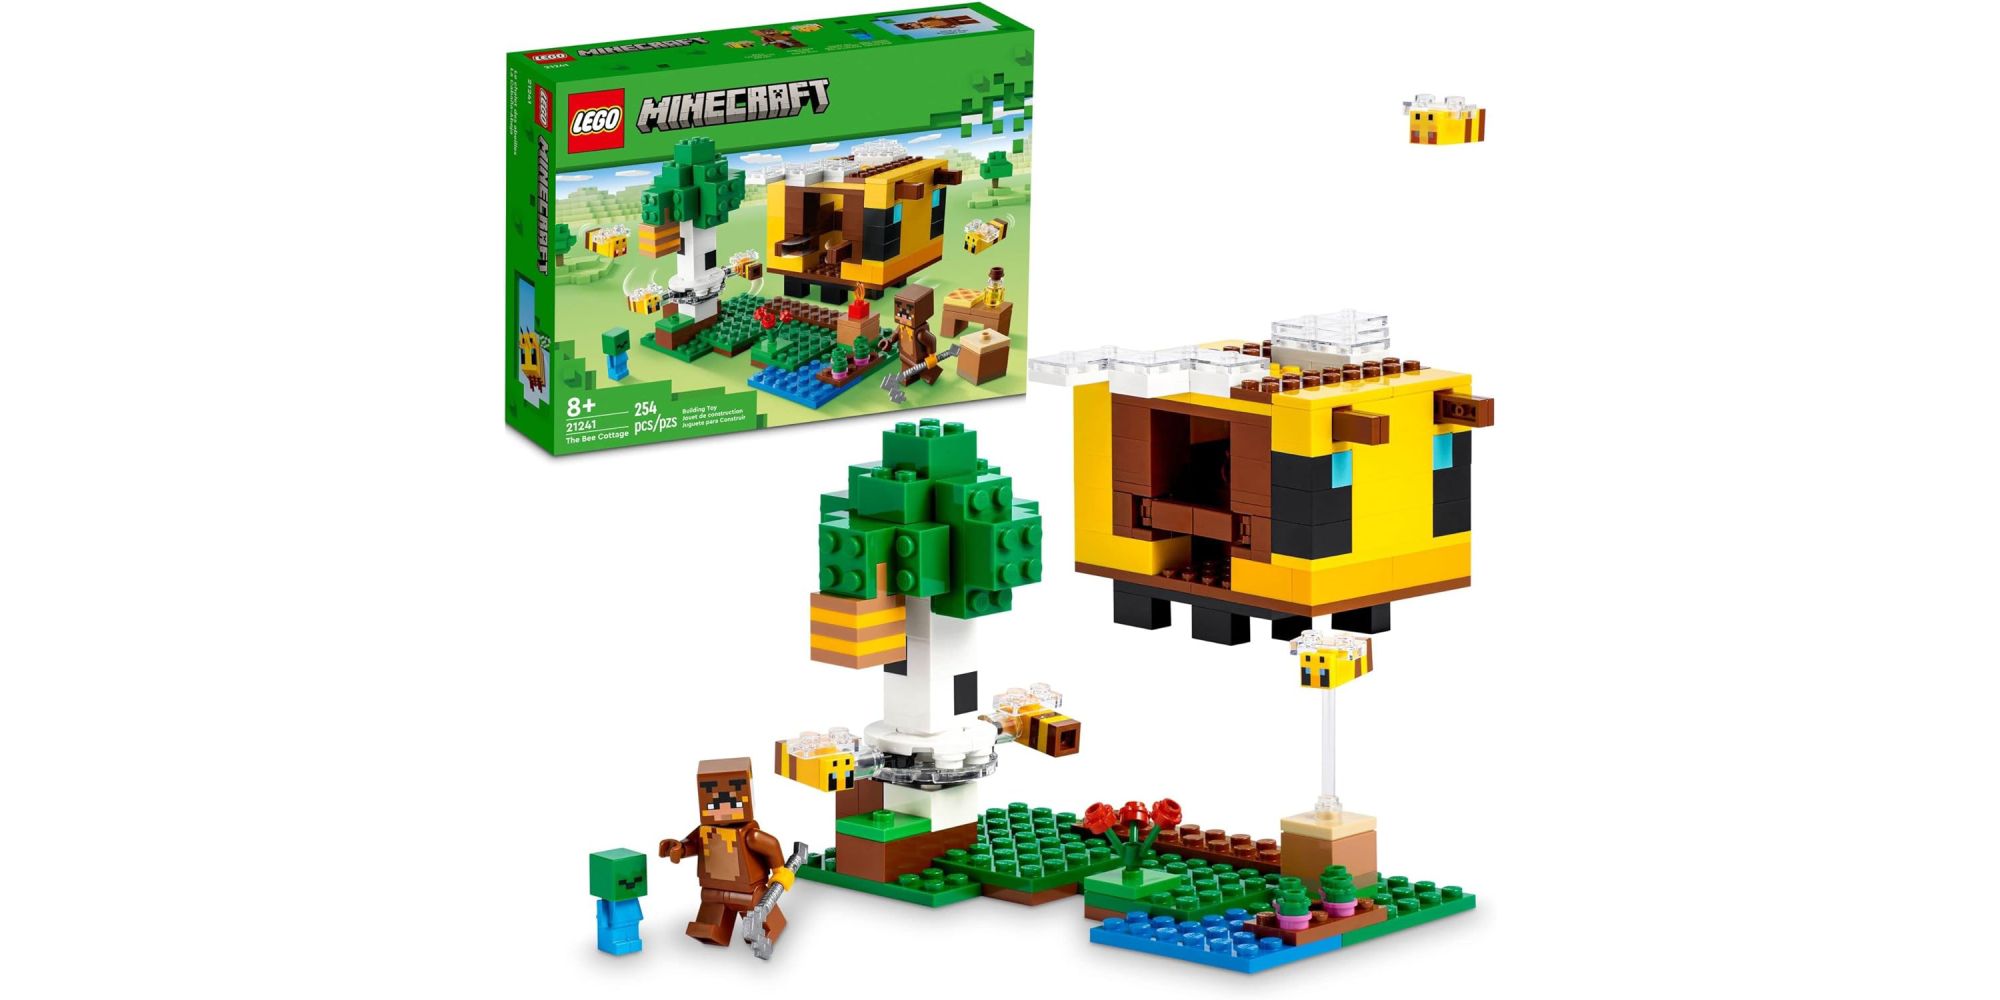 LEGO Minecraft The Bee Cottage featuring beekeeper Minecraft Steve, bees, and a cottage